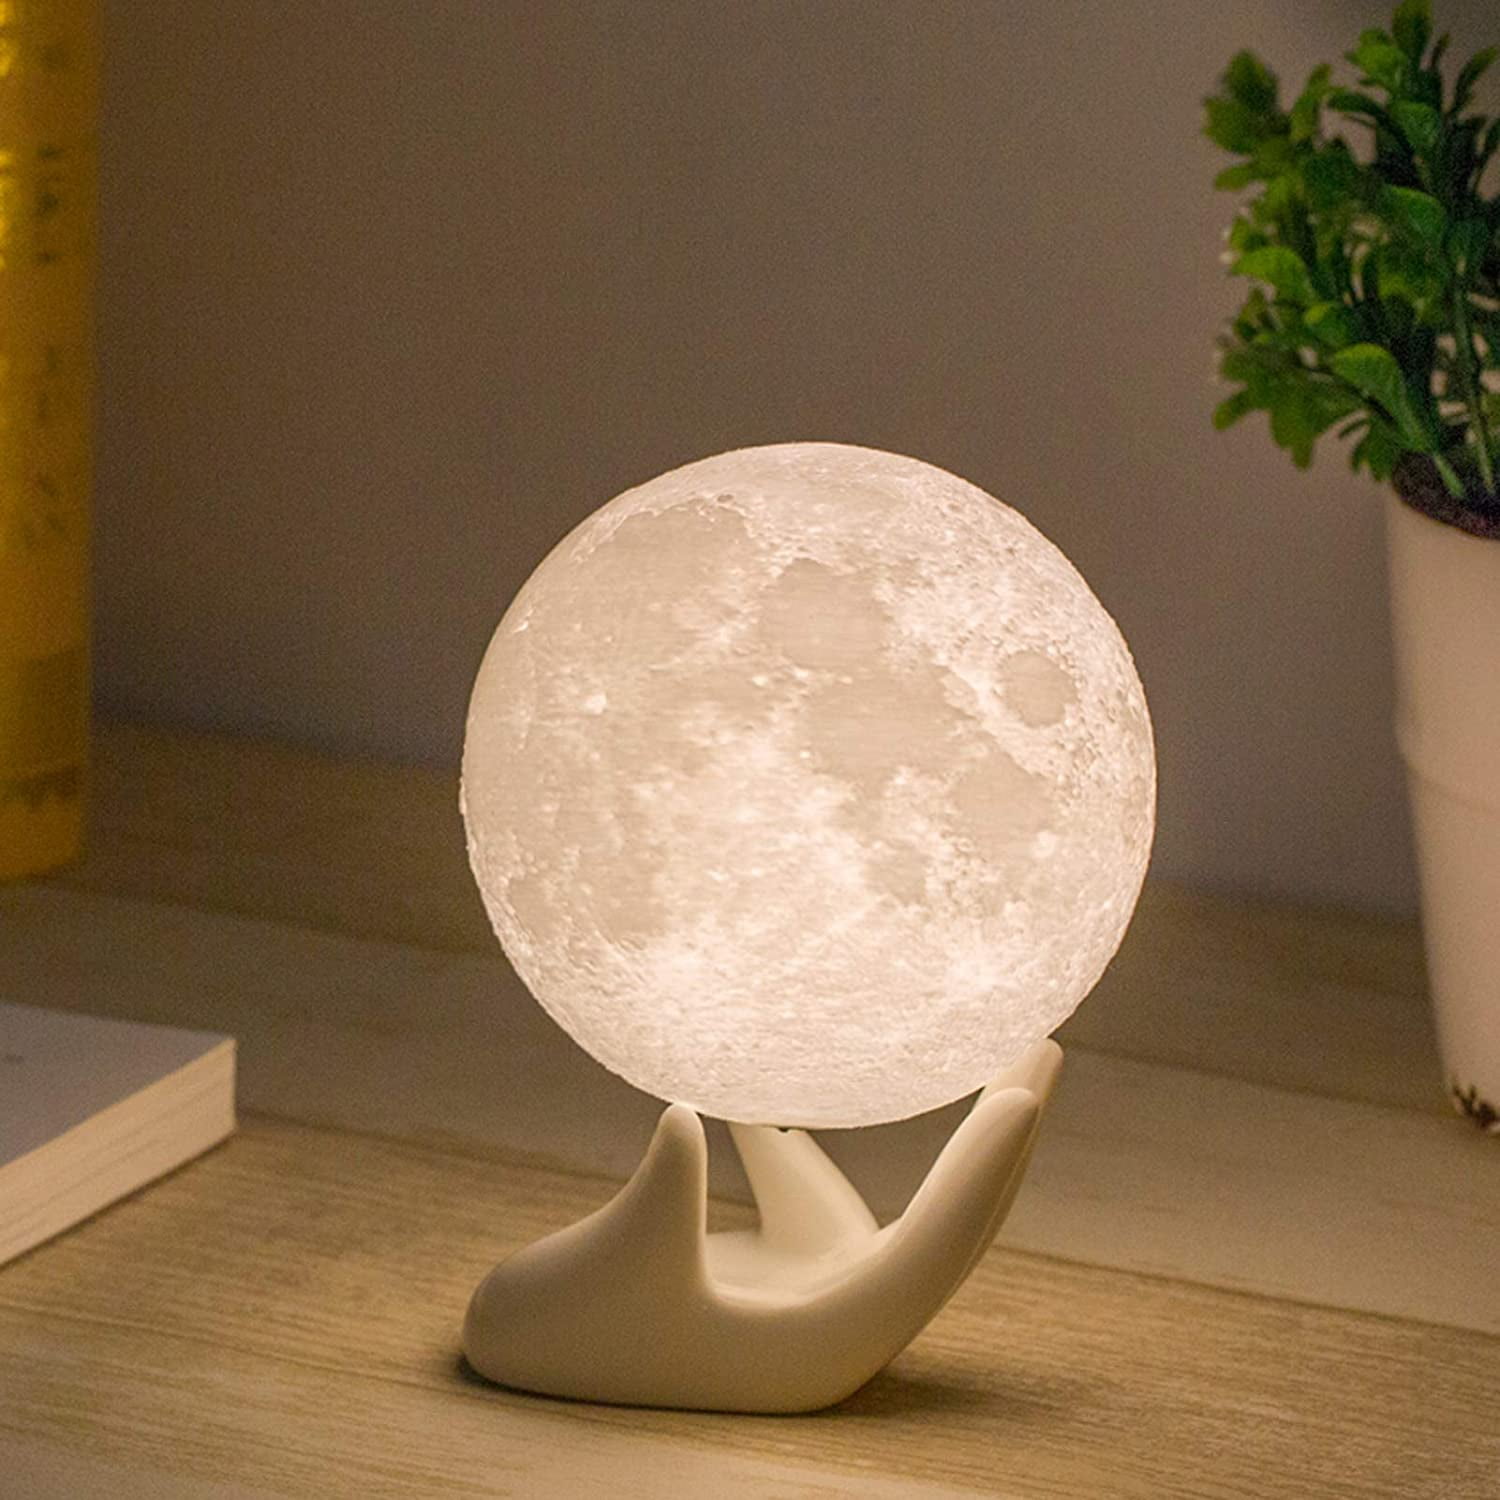 Moon Lamp Desk Night Light Warm and Cool White Gift For Her Romantic 2 Colors 